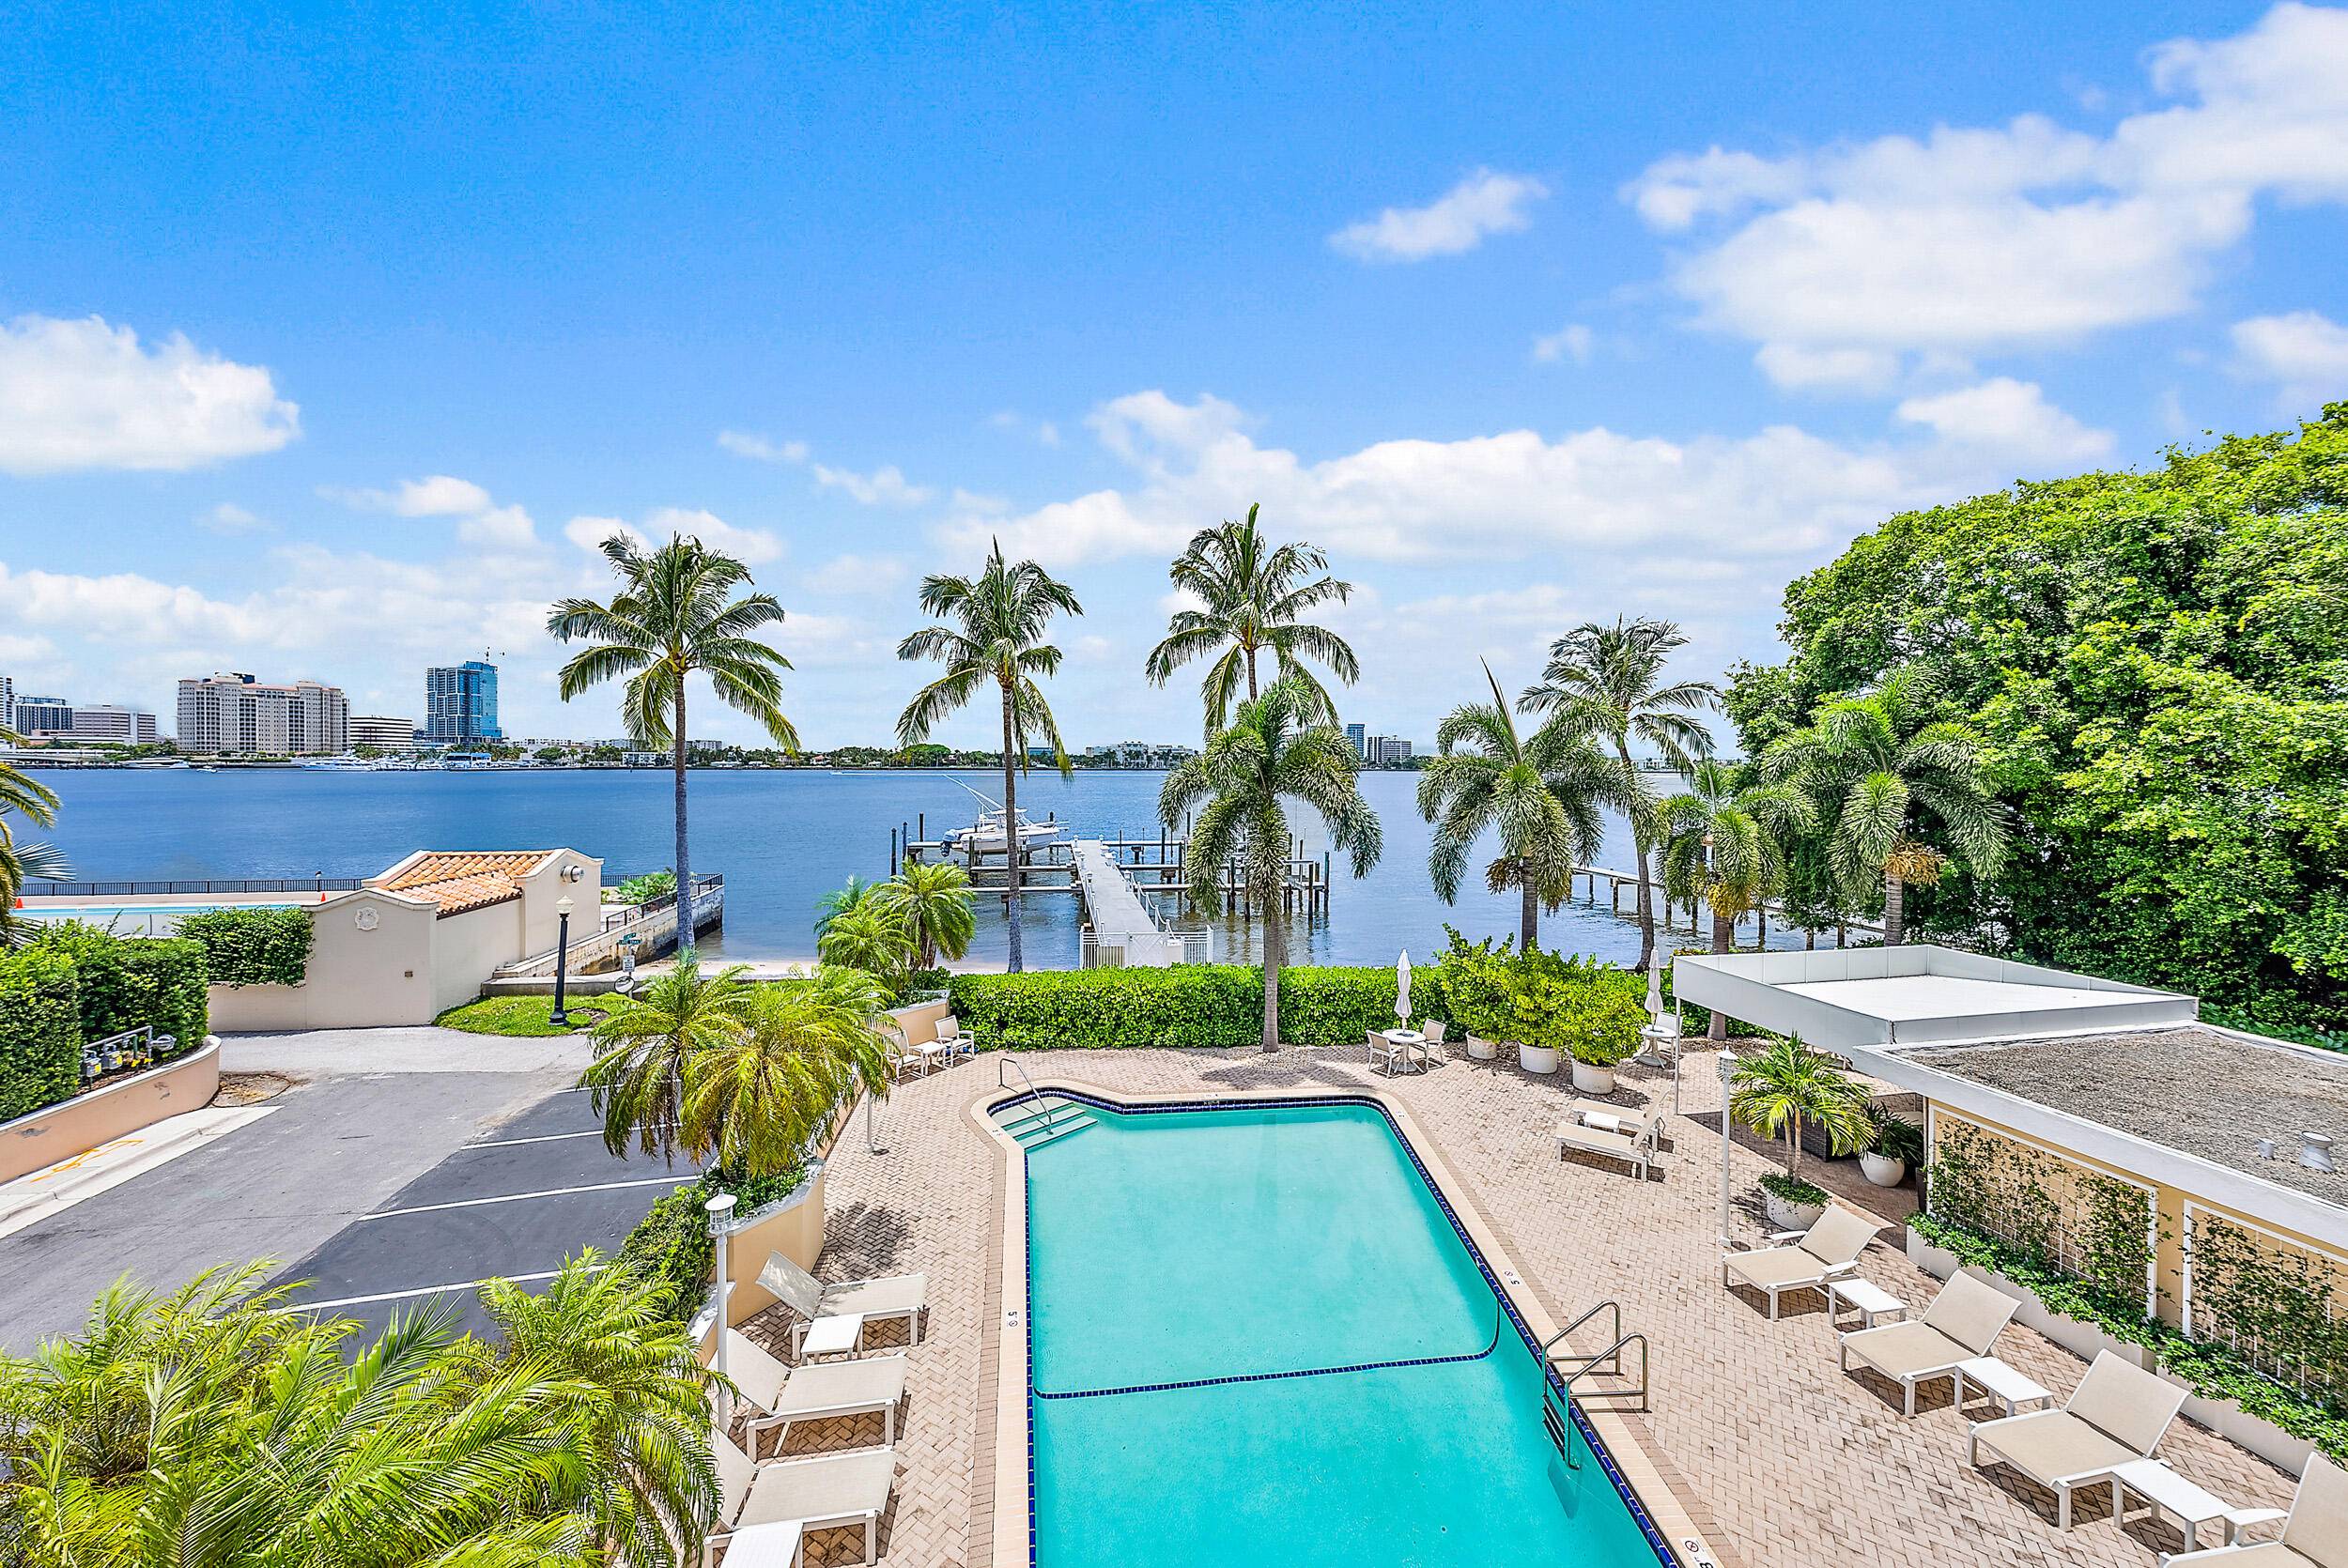 Enjoy unique panoramic intracoastal water views from the 60 ft balcony and nearly all rooms of this three bedroom, 2.